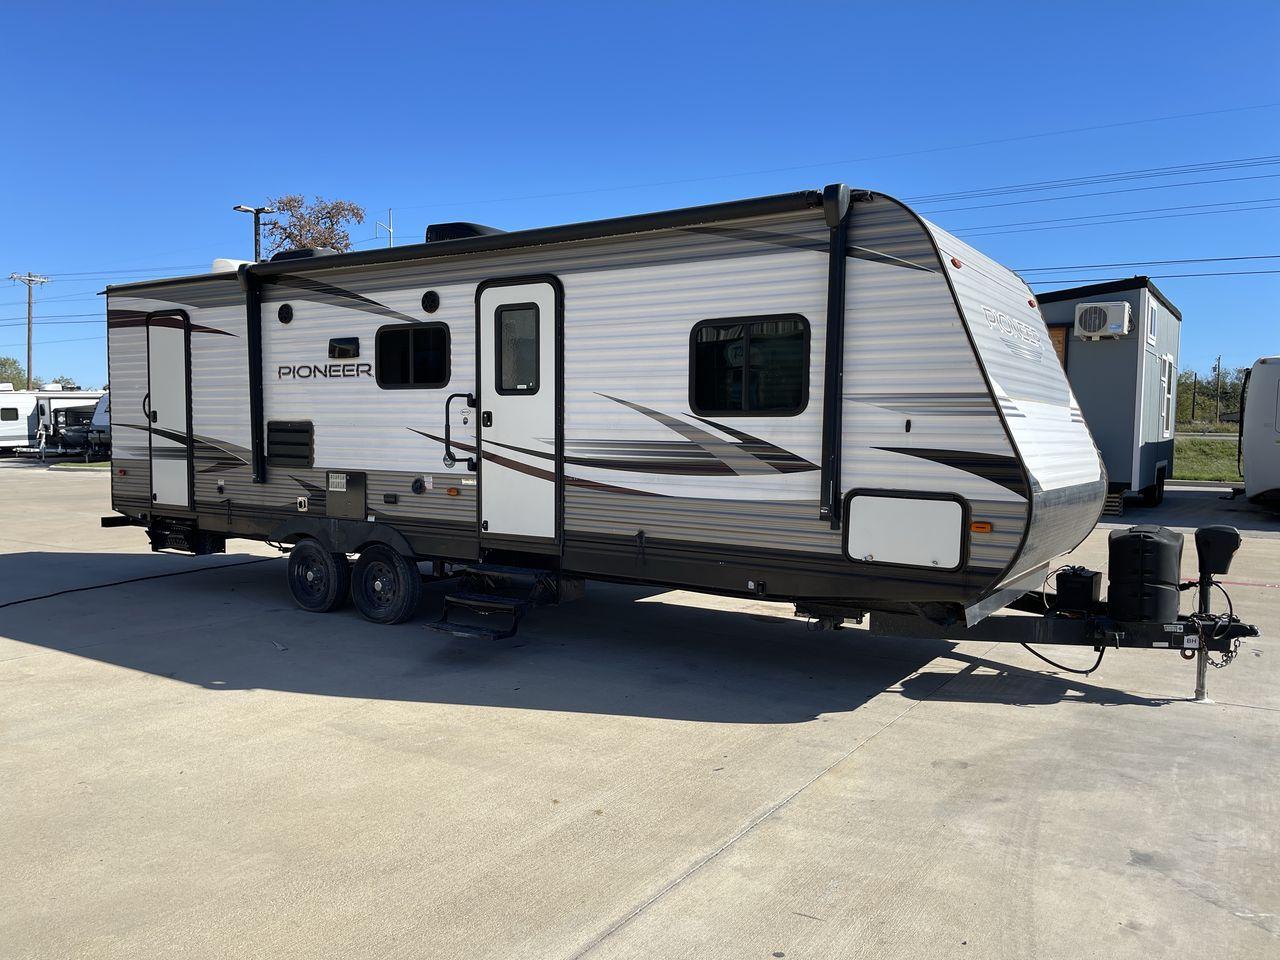 2019 HEARTLAND PIONEER BH270 (5SFPB322XKE) , Length: 31.6 ft | Dry Weight: 6,354 lbs | GVWR: 7,700 lbs | Slides: 1 transmission, located at 4319 N Main Street, Cleburne, TX, 76033, (817) 221-0660, 32.435829, -97.384178 - The 2019 Heartland Pioneer BH270 travel trailer is made to be a cozy and welcoming camping companion for families. This model has a friendly floor plan, making it a desirable option for individuals looking for a large and practical living area while traveling. This unit measures 31.6 ft in length - Photo #0